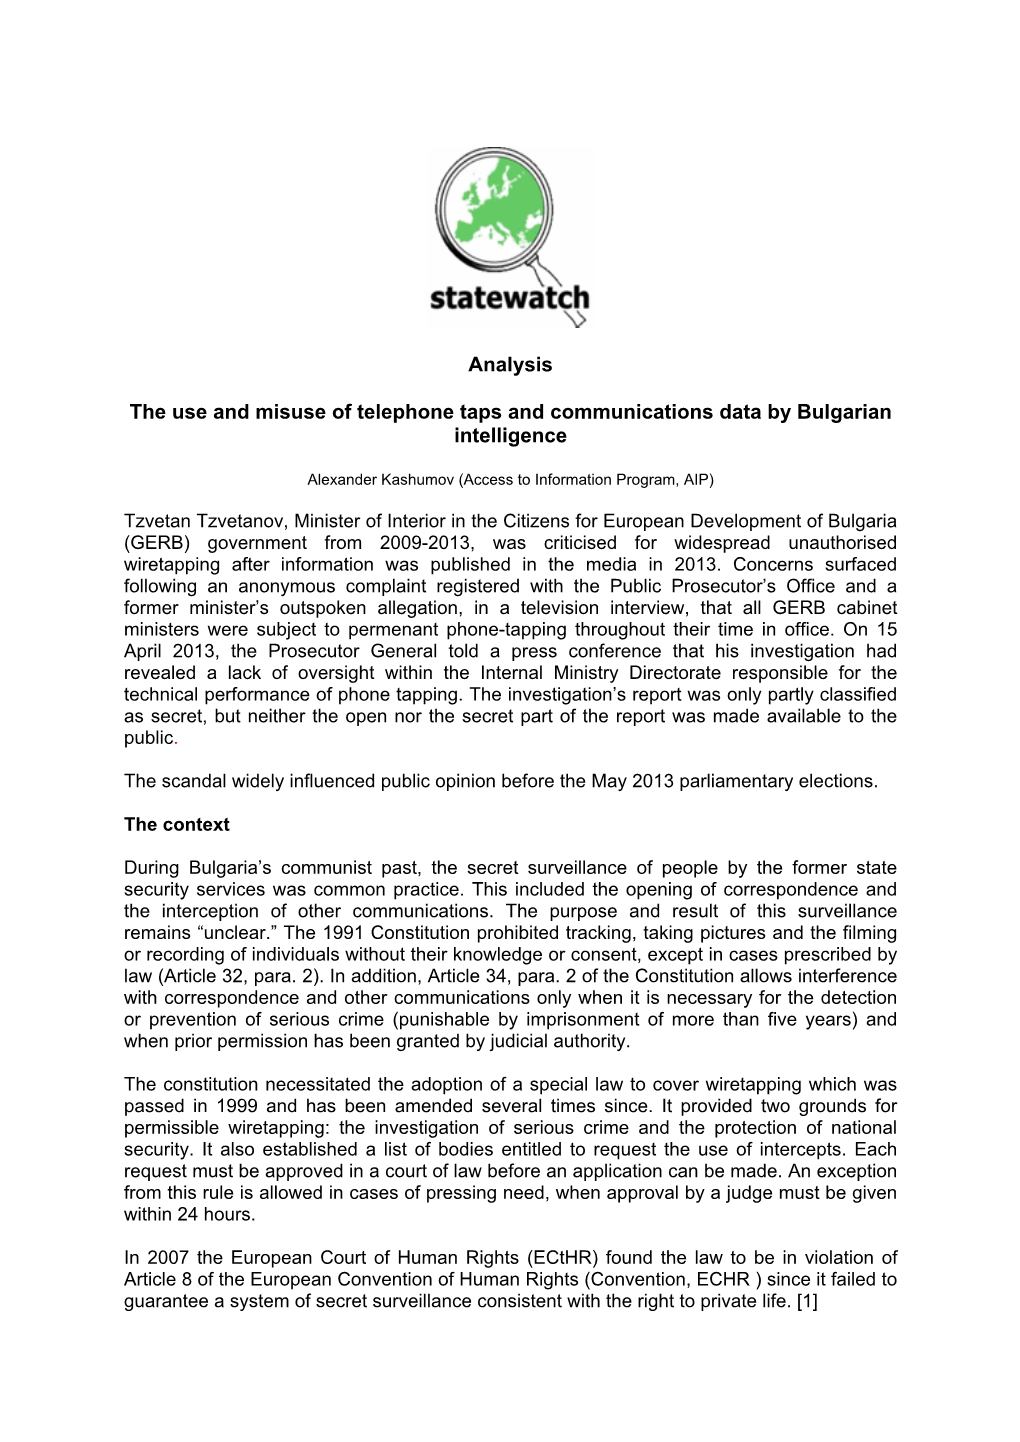 Analysis the Use and Misuse of Telephone Taps and Communications Data by Bulgarian Intelligence